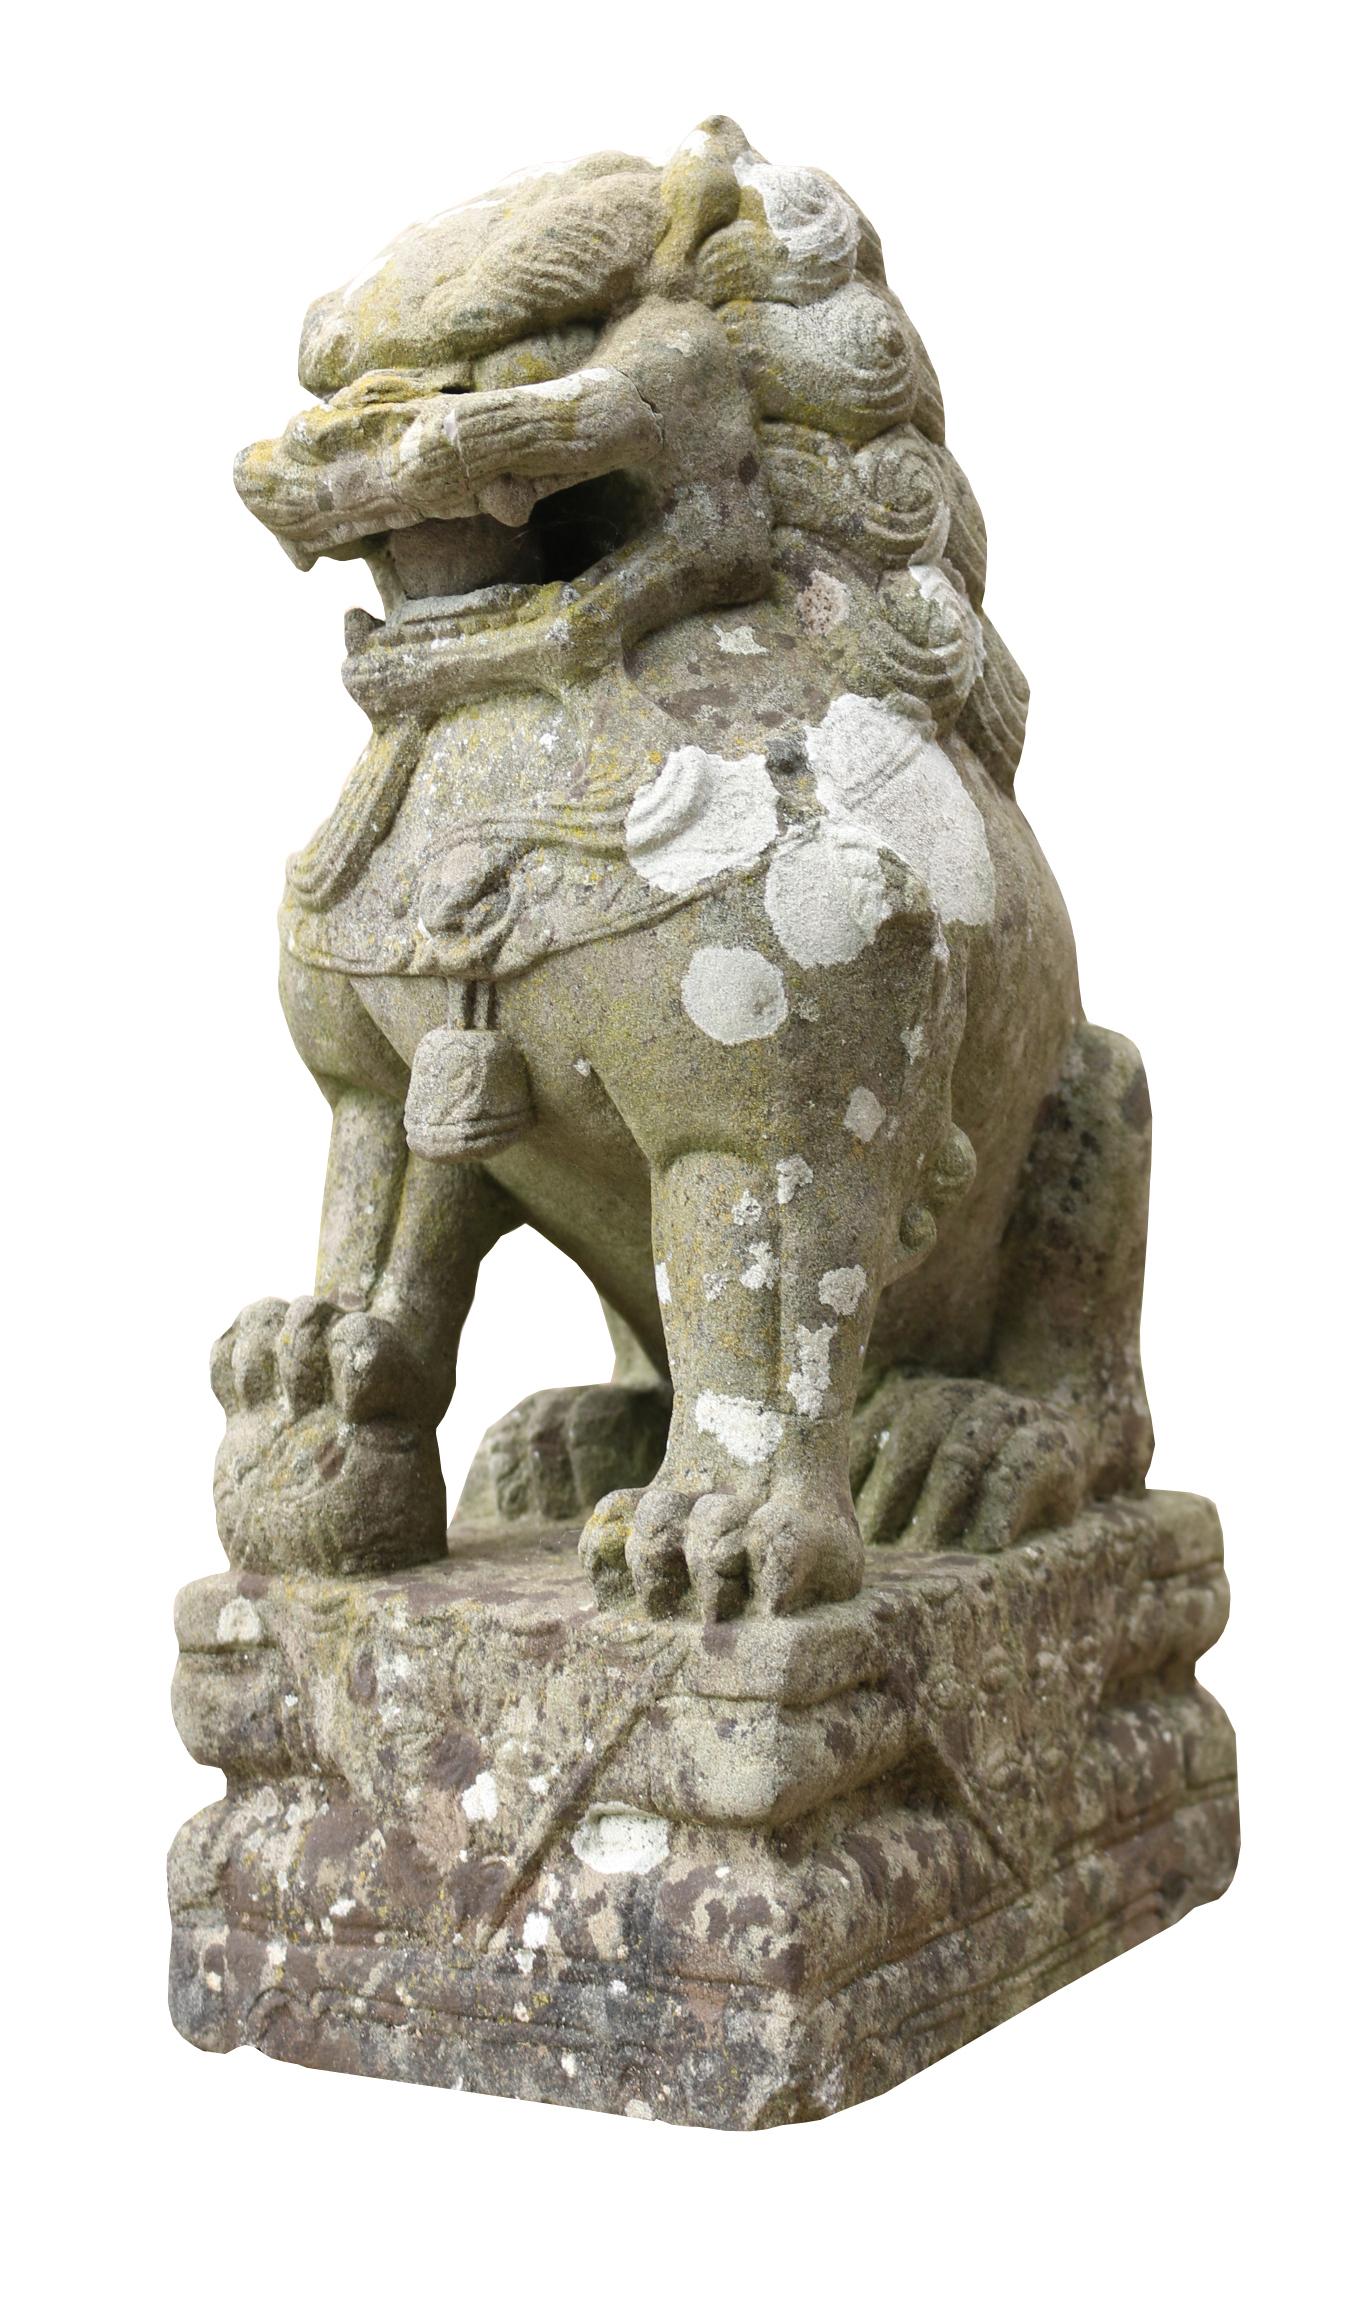 About

Chinese pair of stone guardian foo dogs/guardian lions

Referred to as “Foo Dogs” or “Fu Dogs” in western culture, these handsome stone gatekeepers are seen throughout Asia. Traditional symbols of protection, they are made from durable